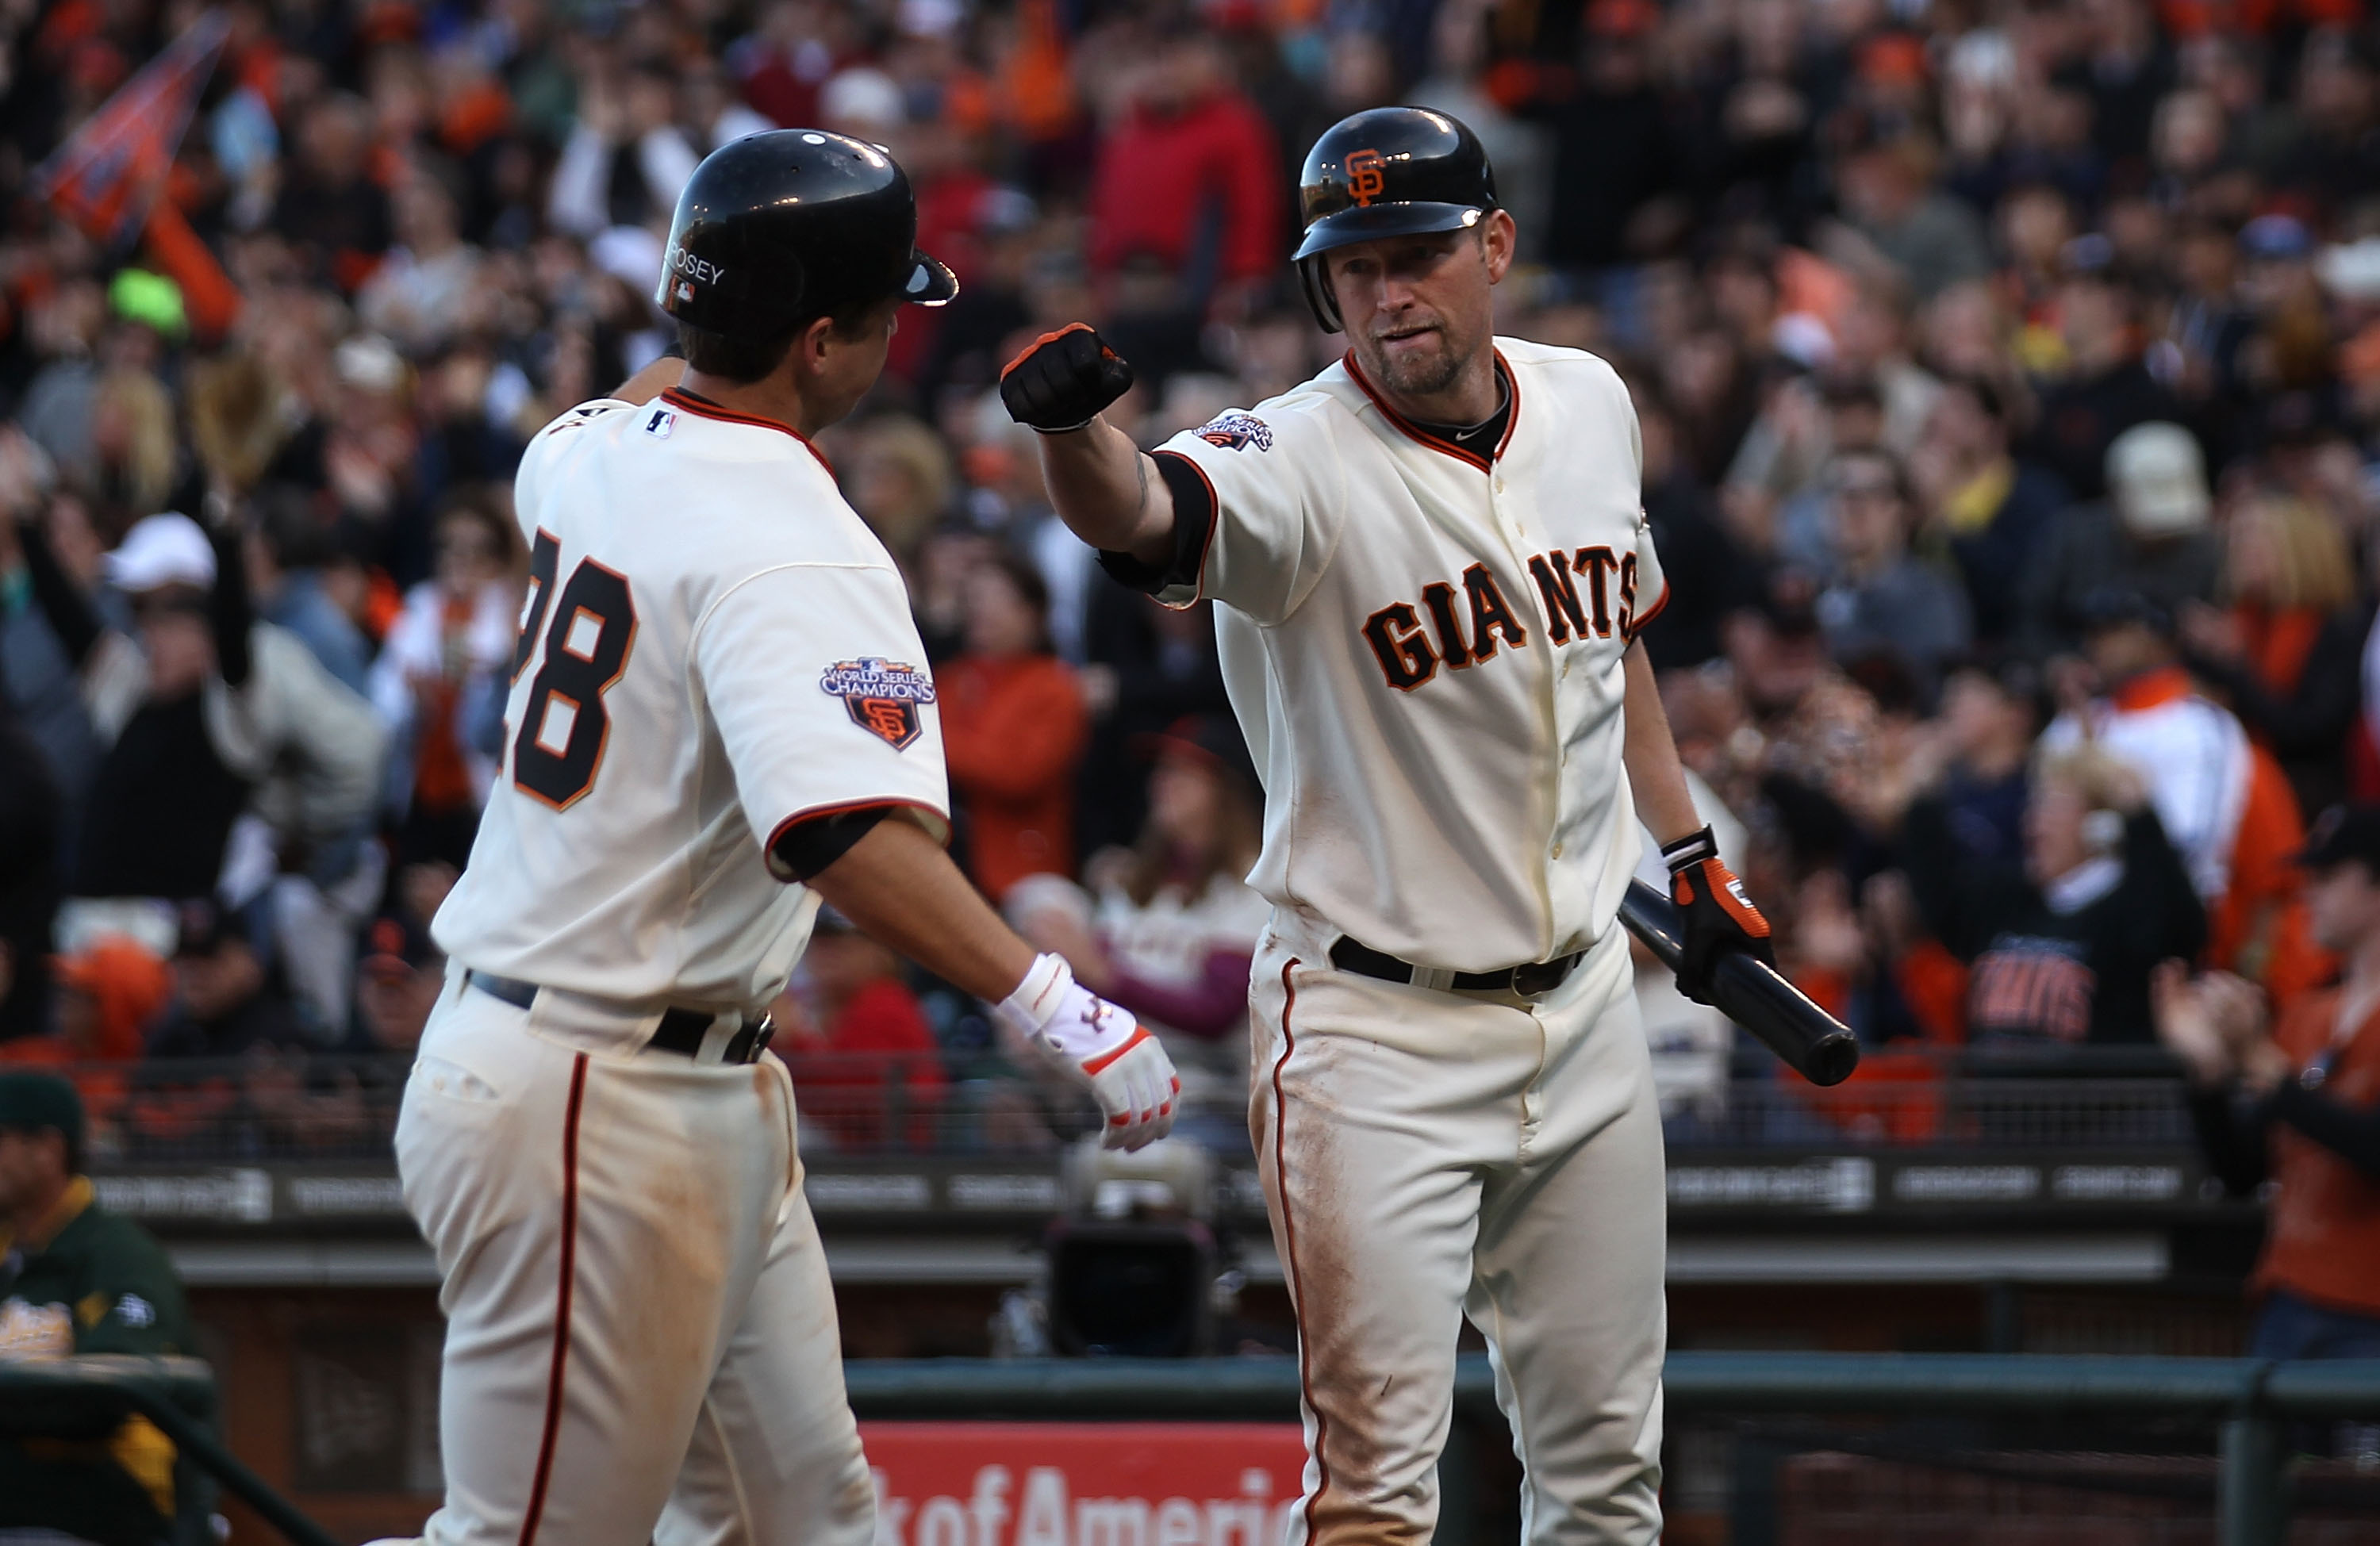 On this date, 2010: Giants rookie Buster Posey makes lasting